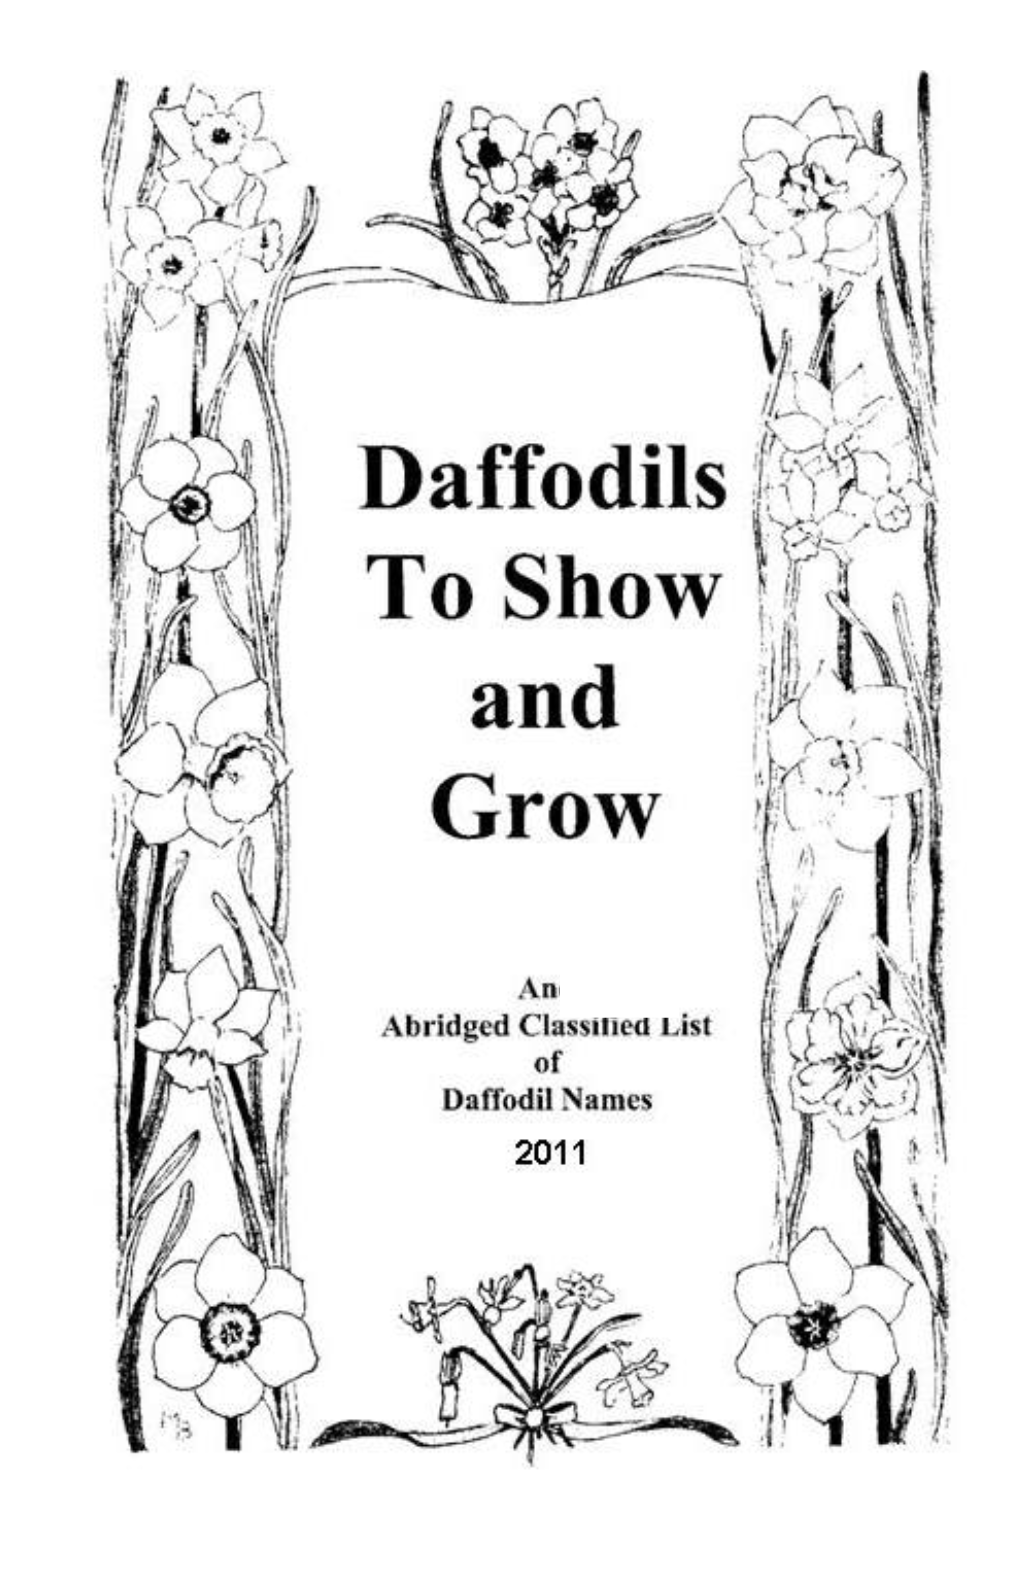 Daffodils to Show and Grow, 2011